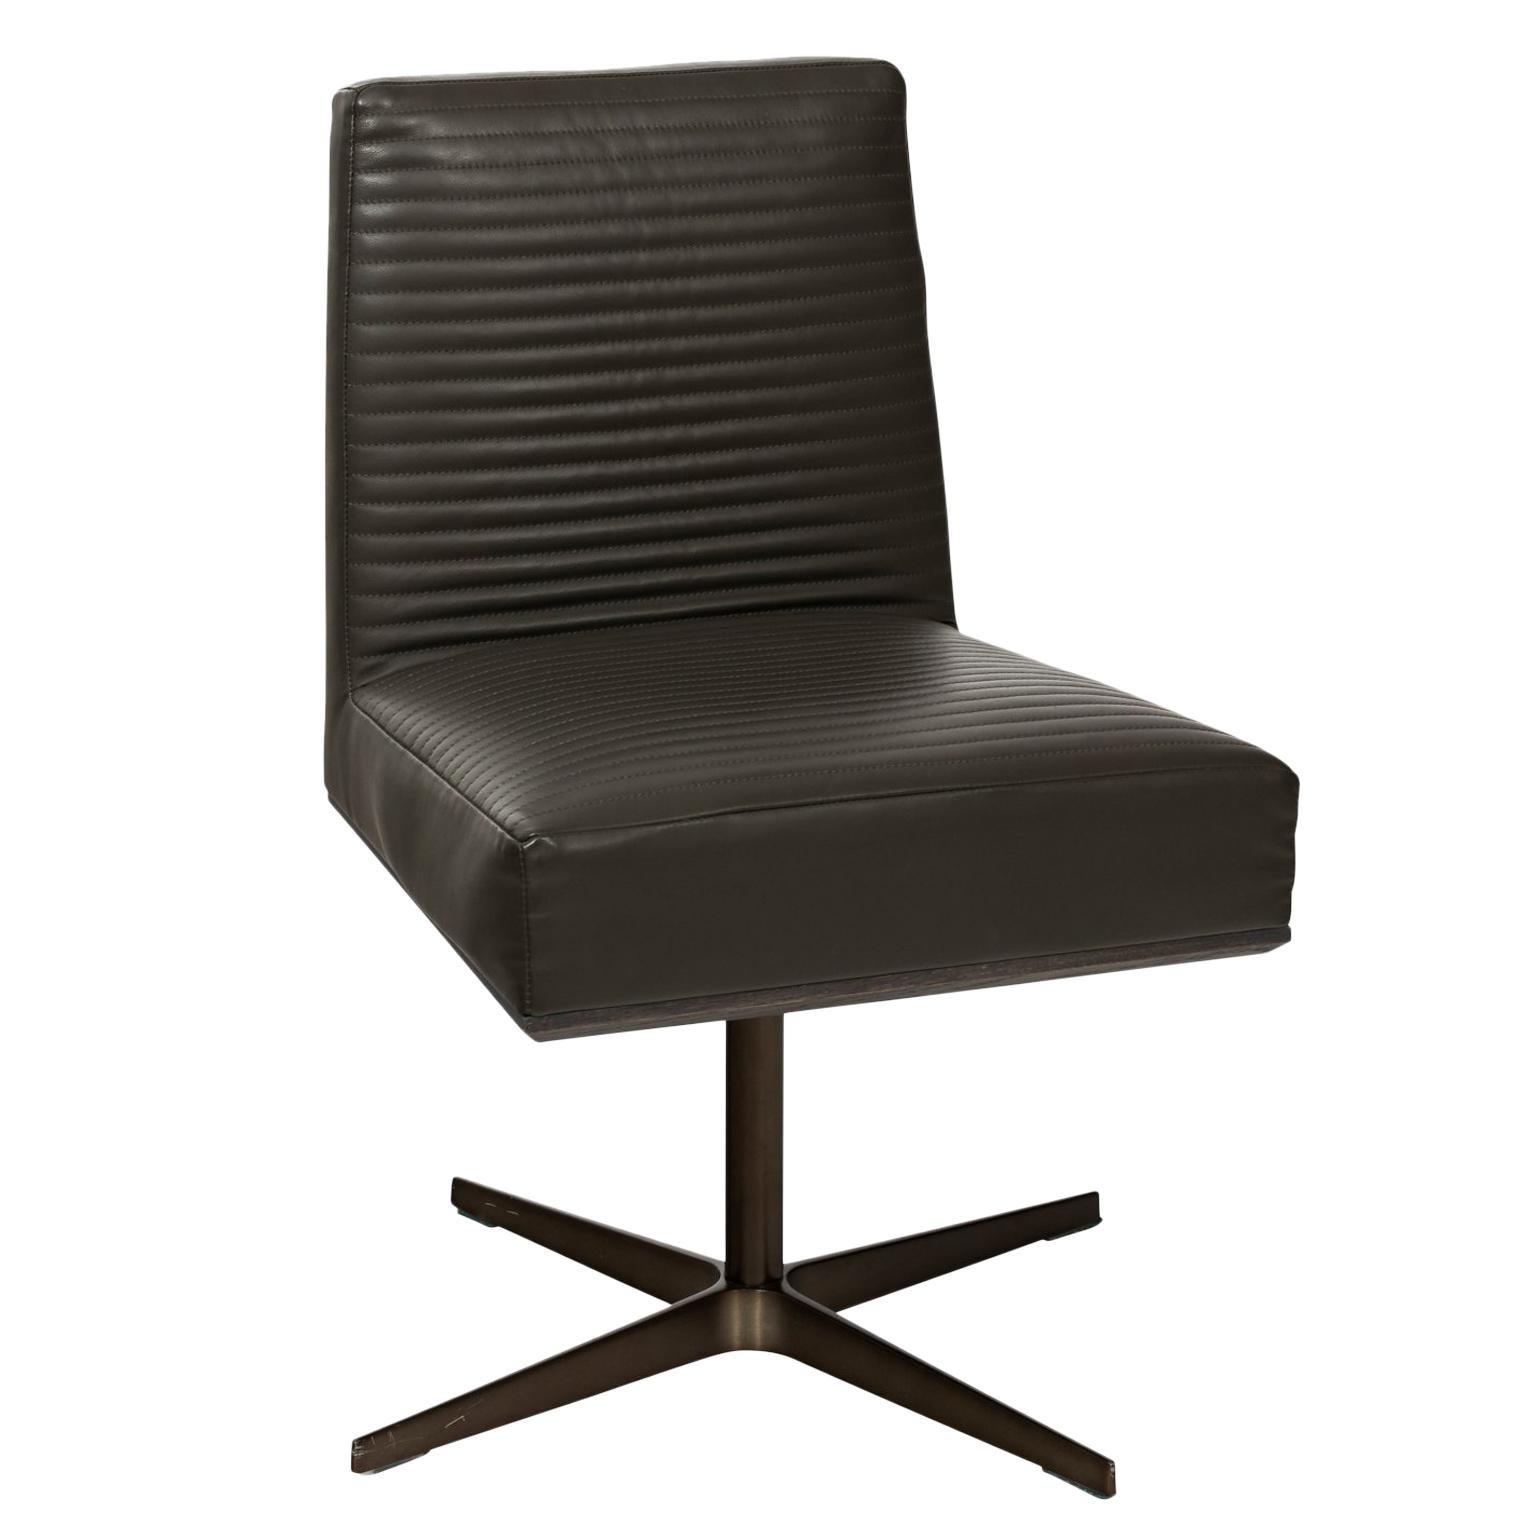 Leather Desk Chair For Sale